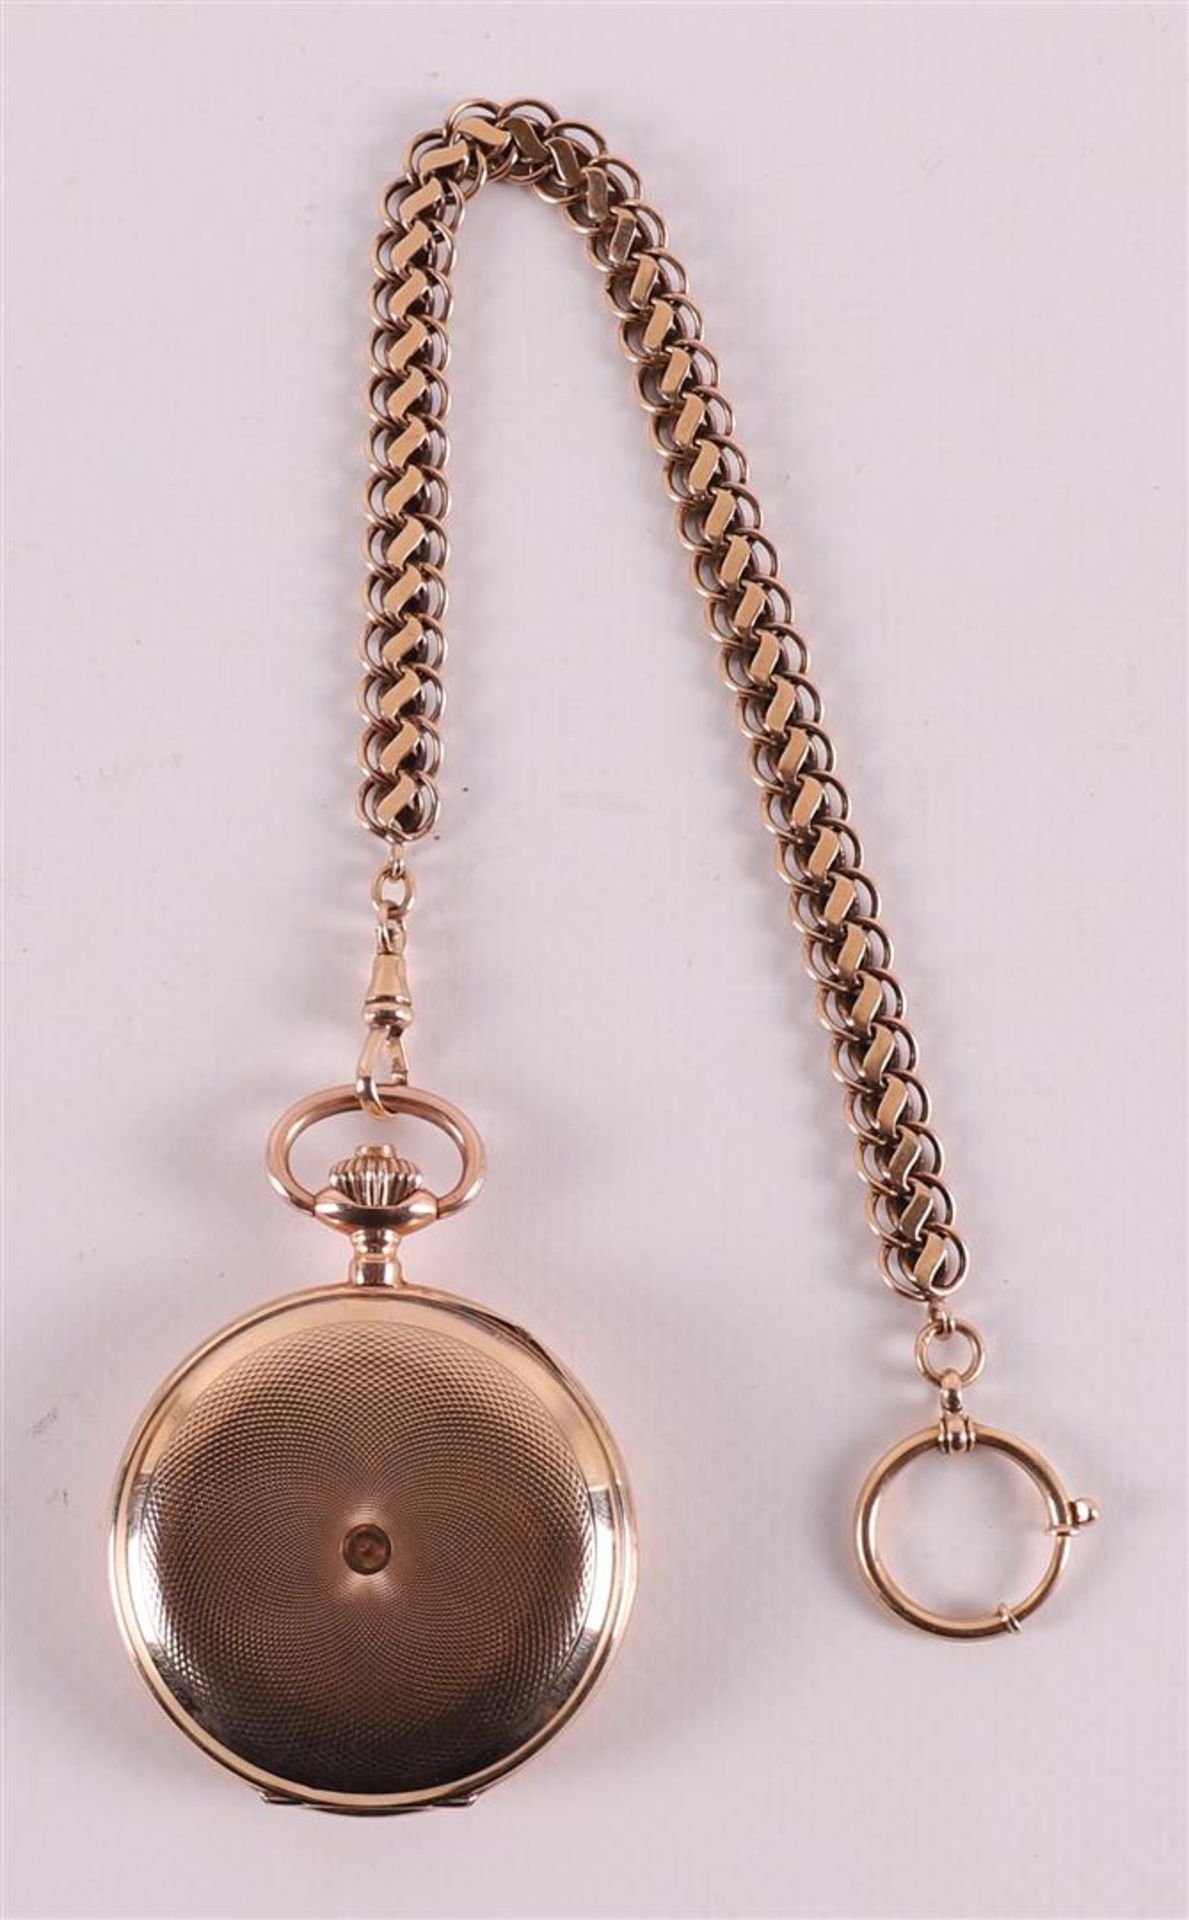 An Ancre Ligne droite men's vest pocket watch in a 14 kt case and ditto chain. - Image 5 of 5